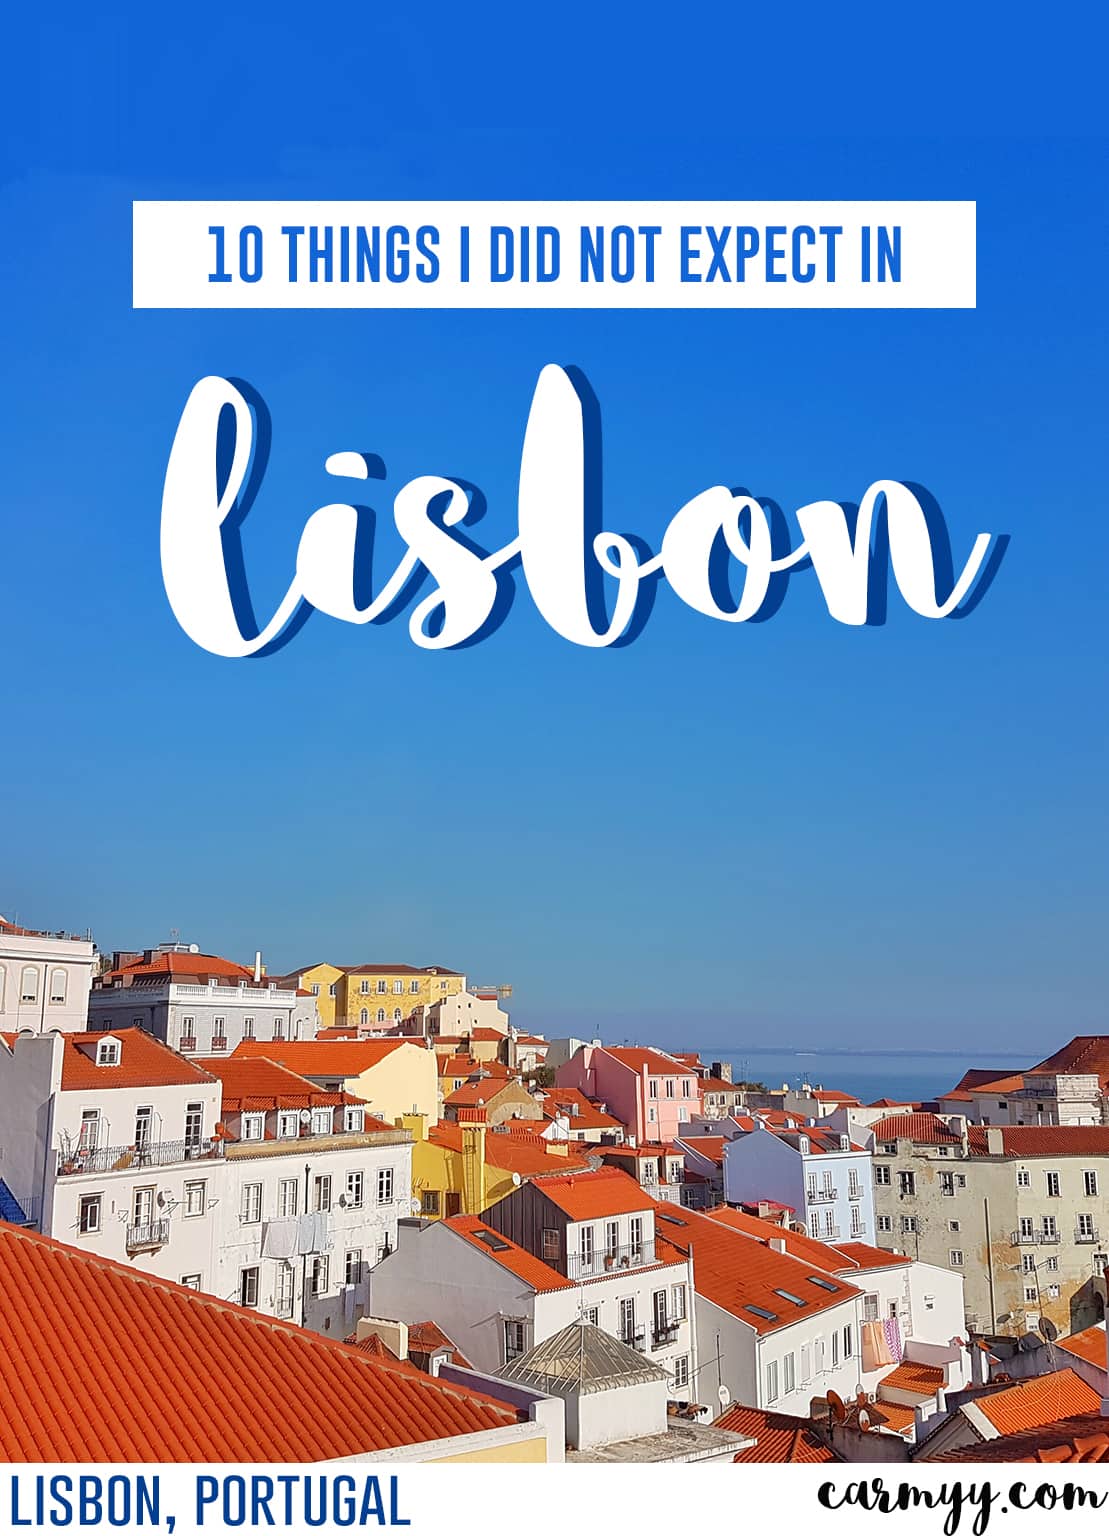 10 Things I Did Not Expect in Lisbon